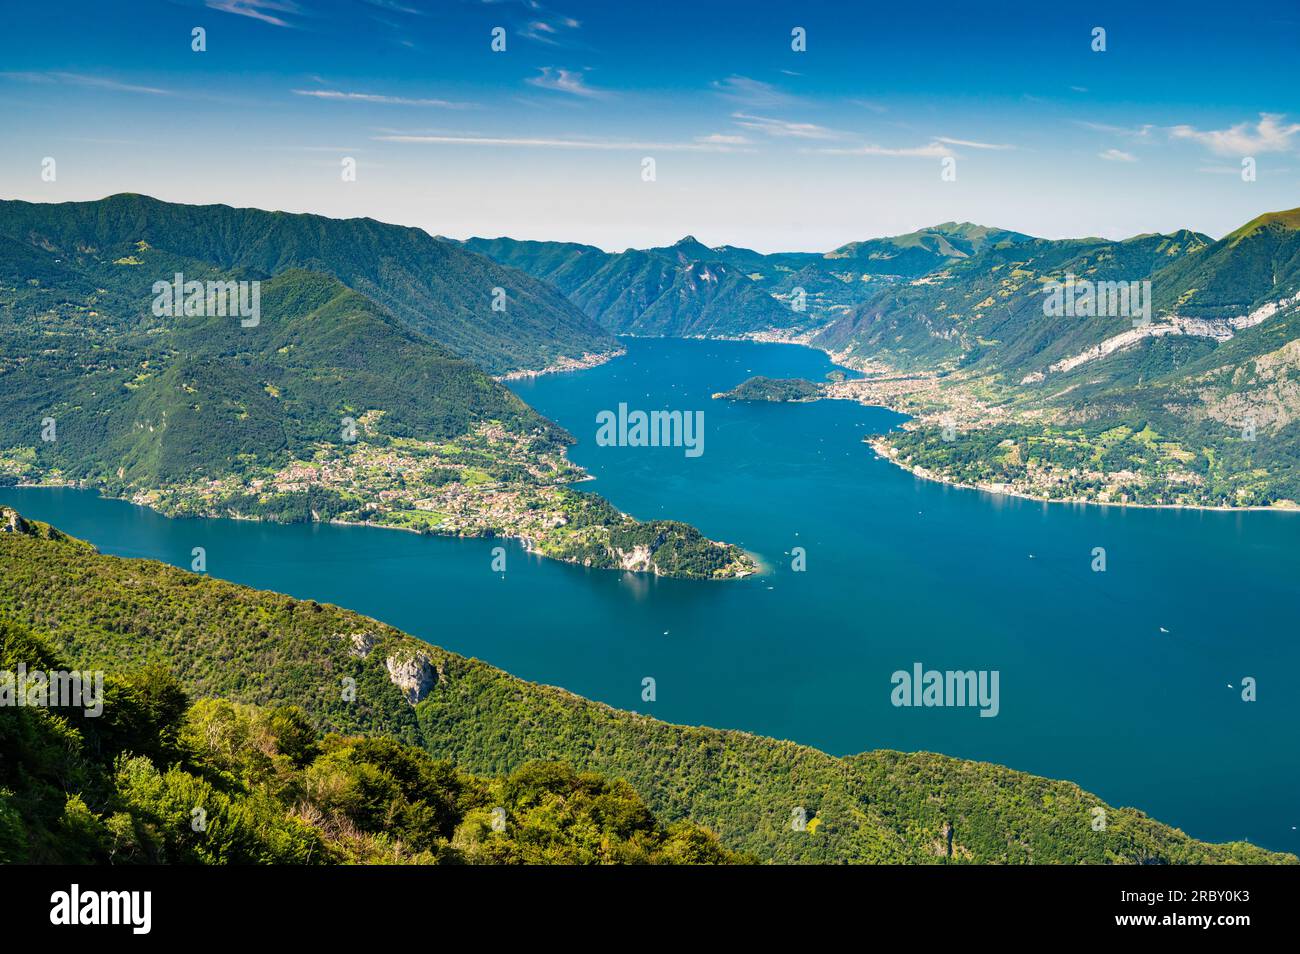 Lake Como, photographed from Mount San Defendente, in Esino Lario, showing Bellagio, Punta Balbianello, and the mountains of the lake, on a summer day Stock Photo